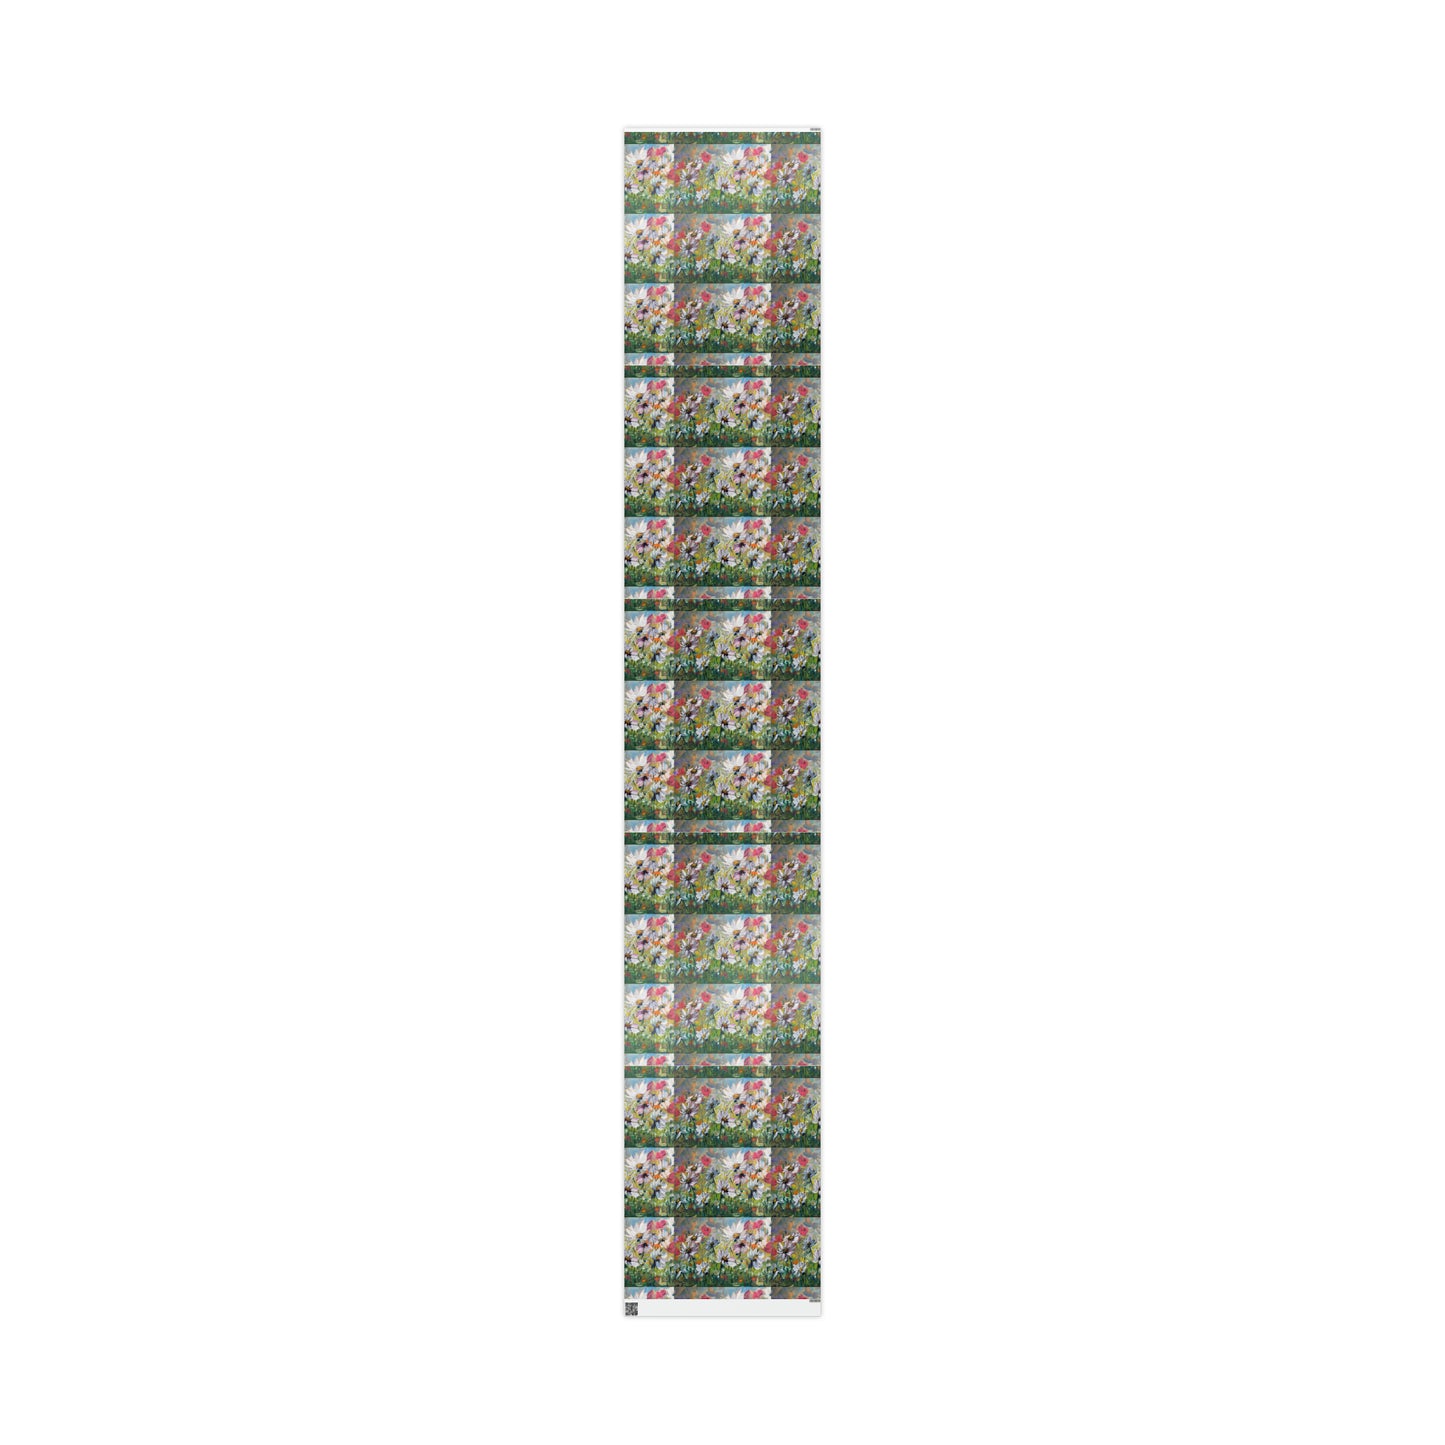 Daisy Garden (3 Sizes) Wrapping Papers